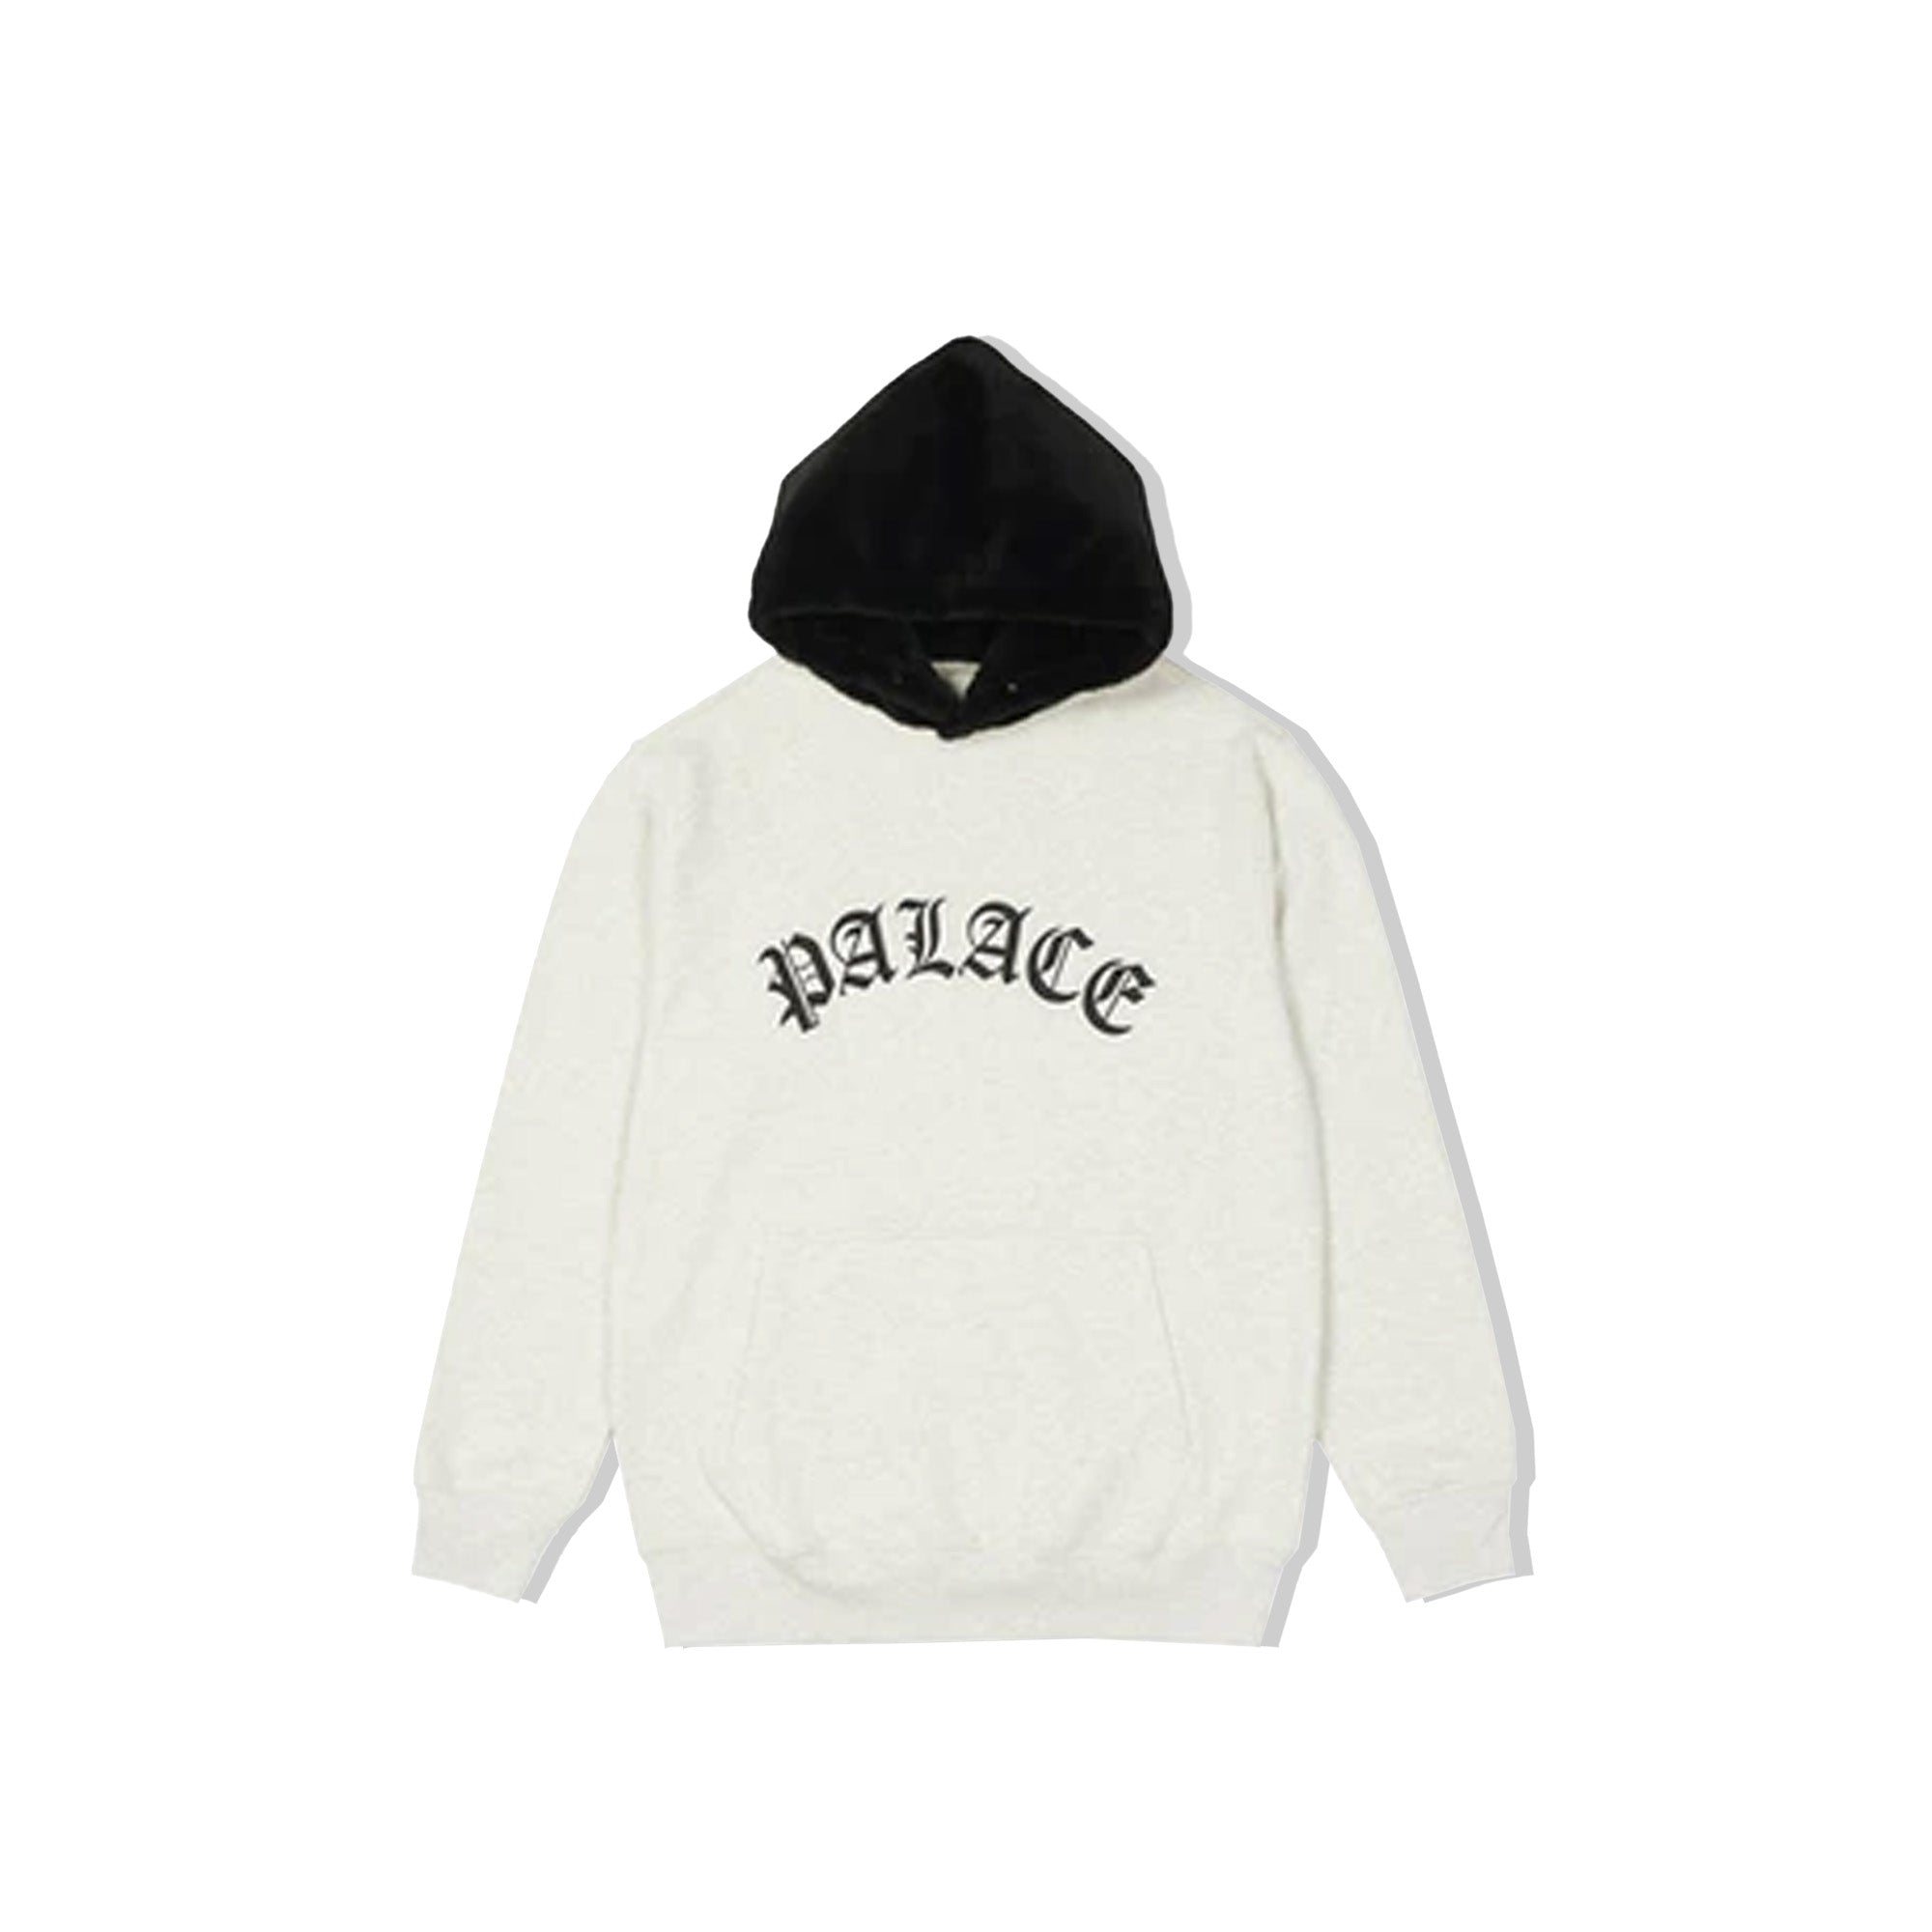 Buy Palace Faux Fur Grey Black Hoodie from Palace Online ...